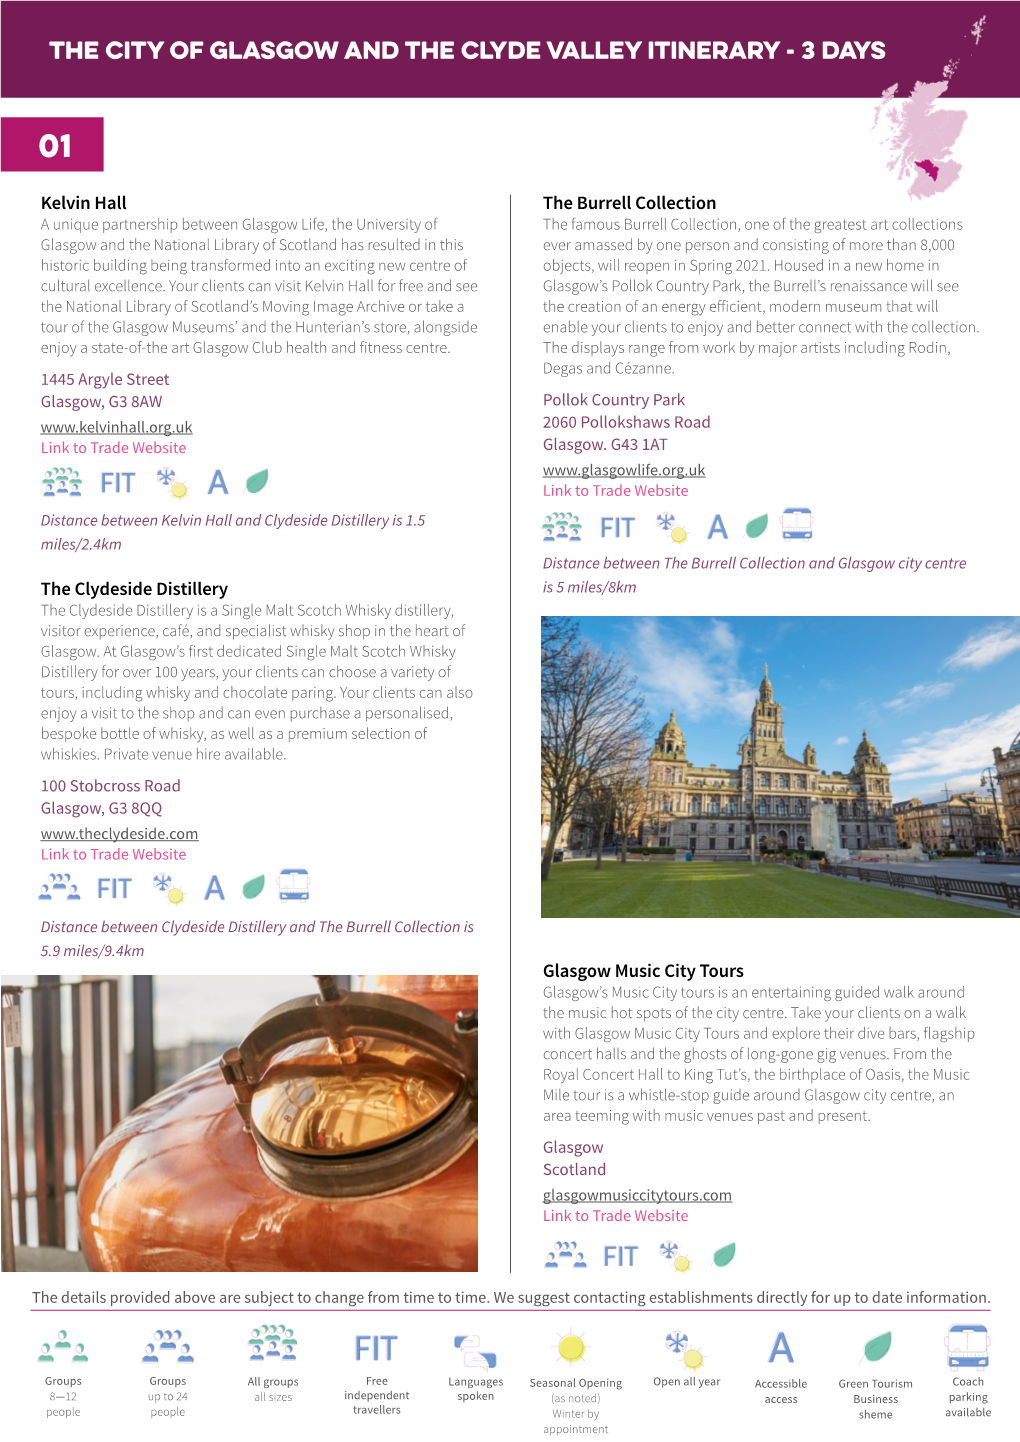 City of Glasgow and Clyde Valley 3 Day Itinerary